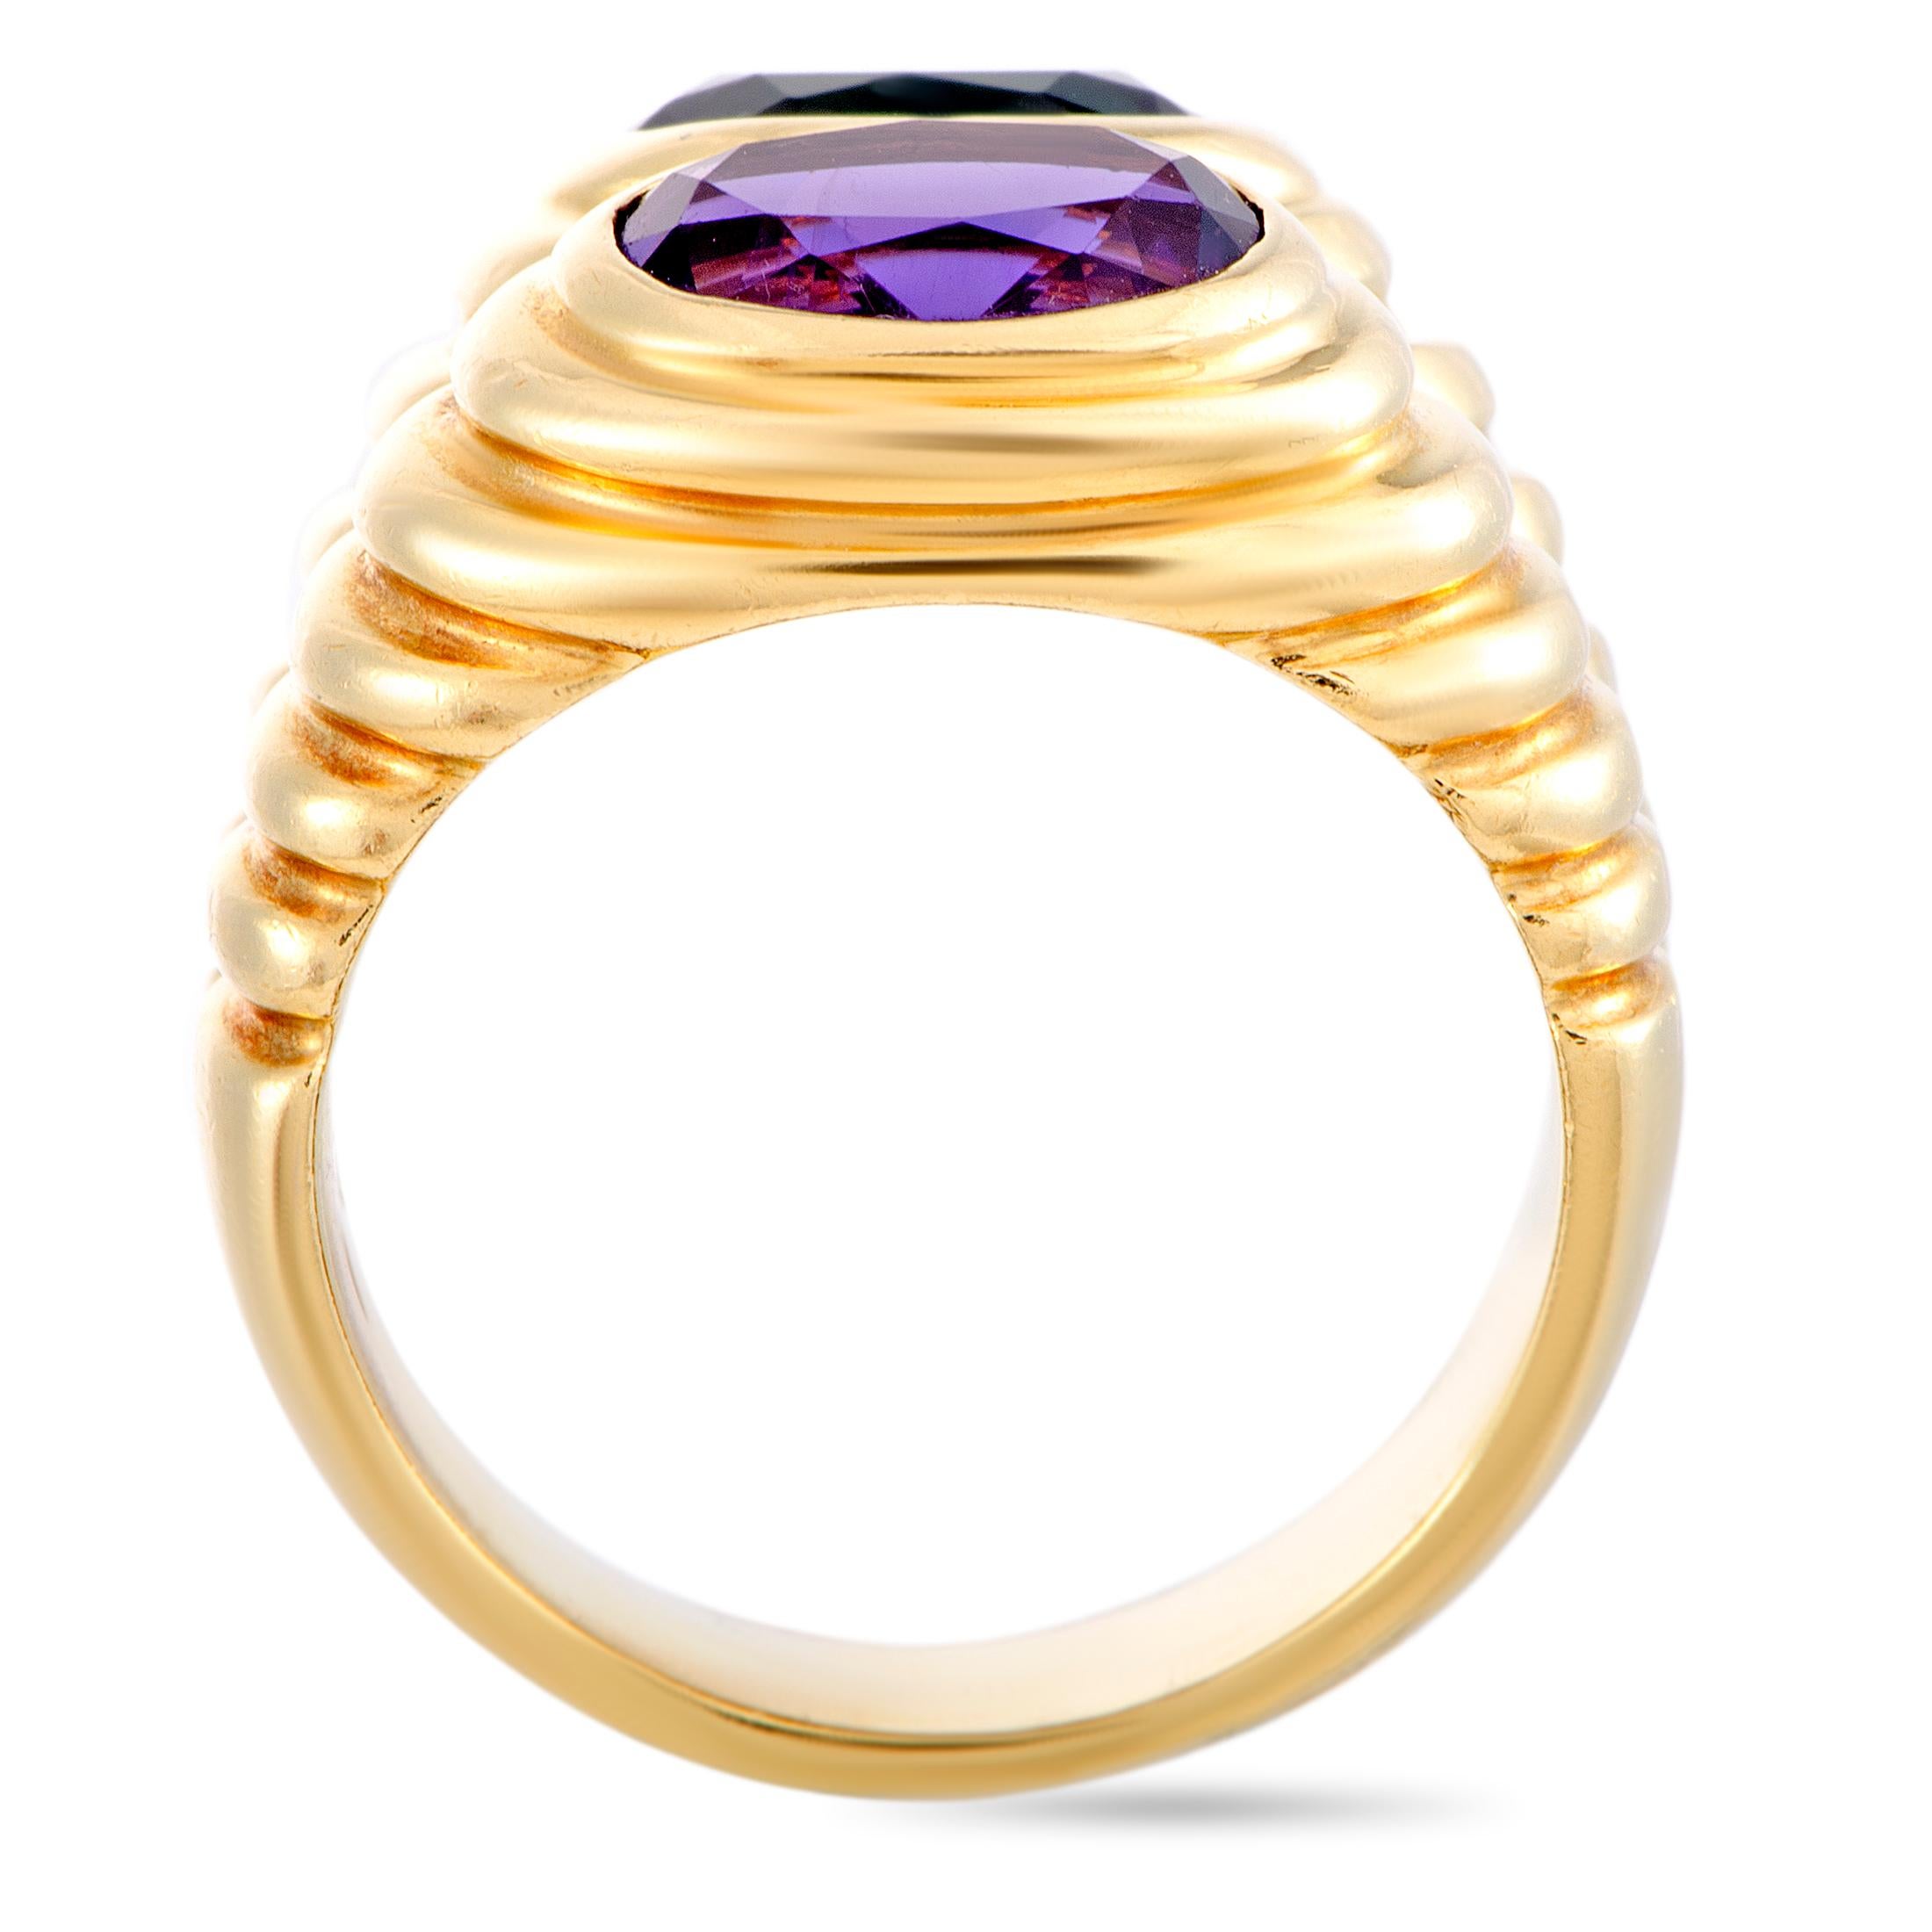 The Bvlgari “Doppio” ring is crafted from 18K yellow gold and set with an amethyst and a tourmaline. The ring weighs 15.2 grams, boasting band thickness of 5 mm and top height of 5 mm, while top dimensions measure 15 by 10 mm.

This jewelry piece is